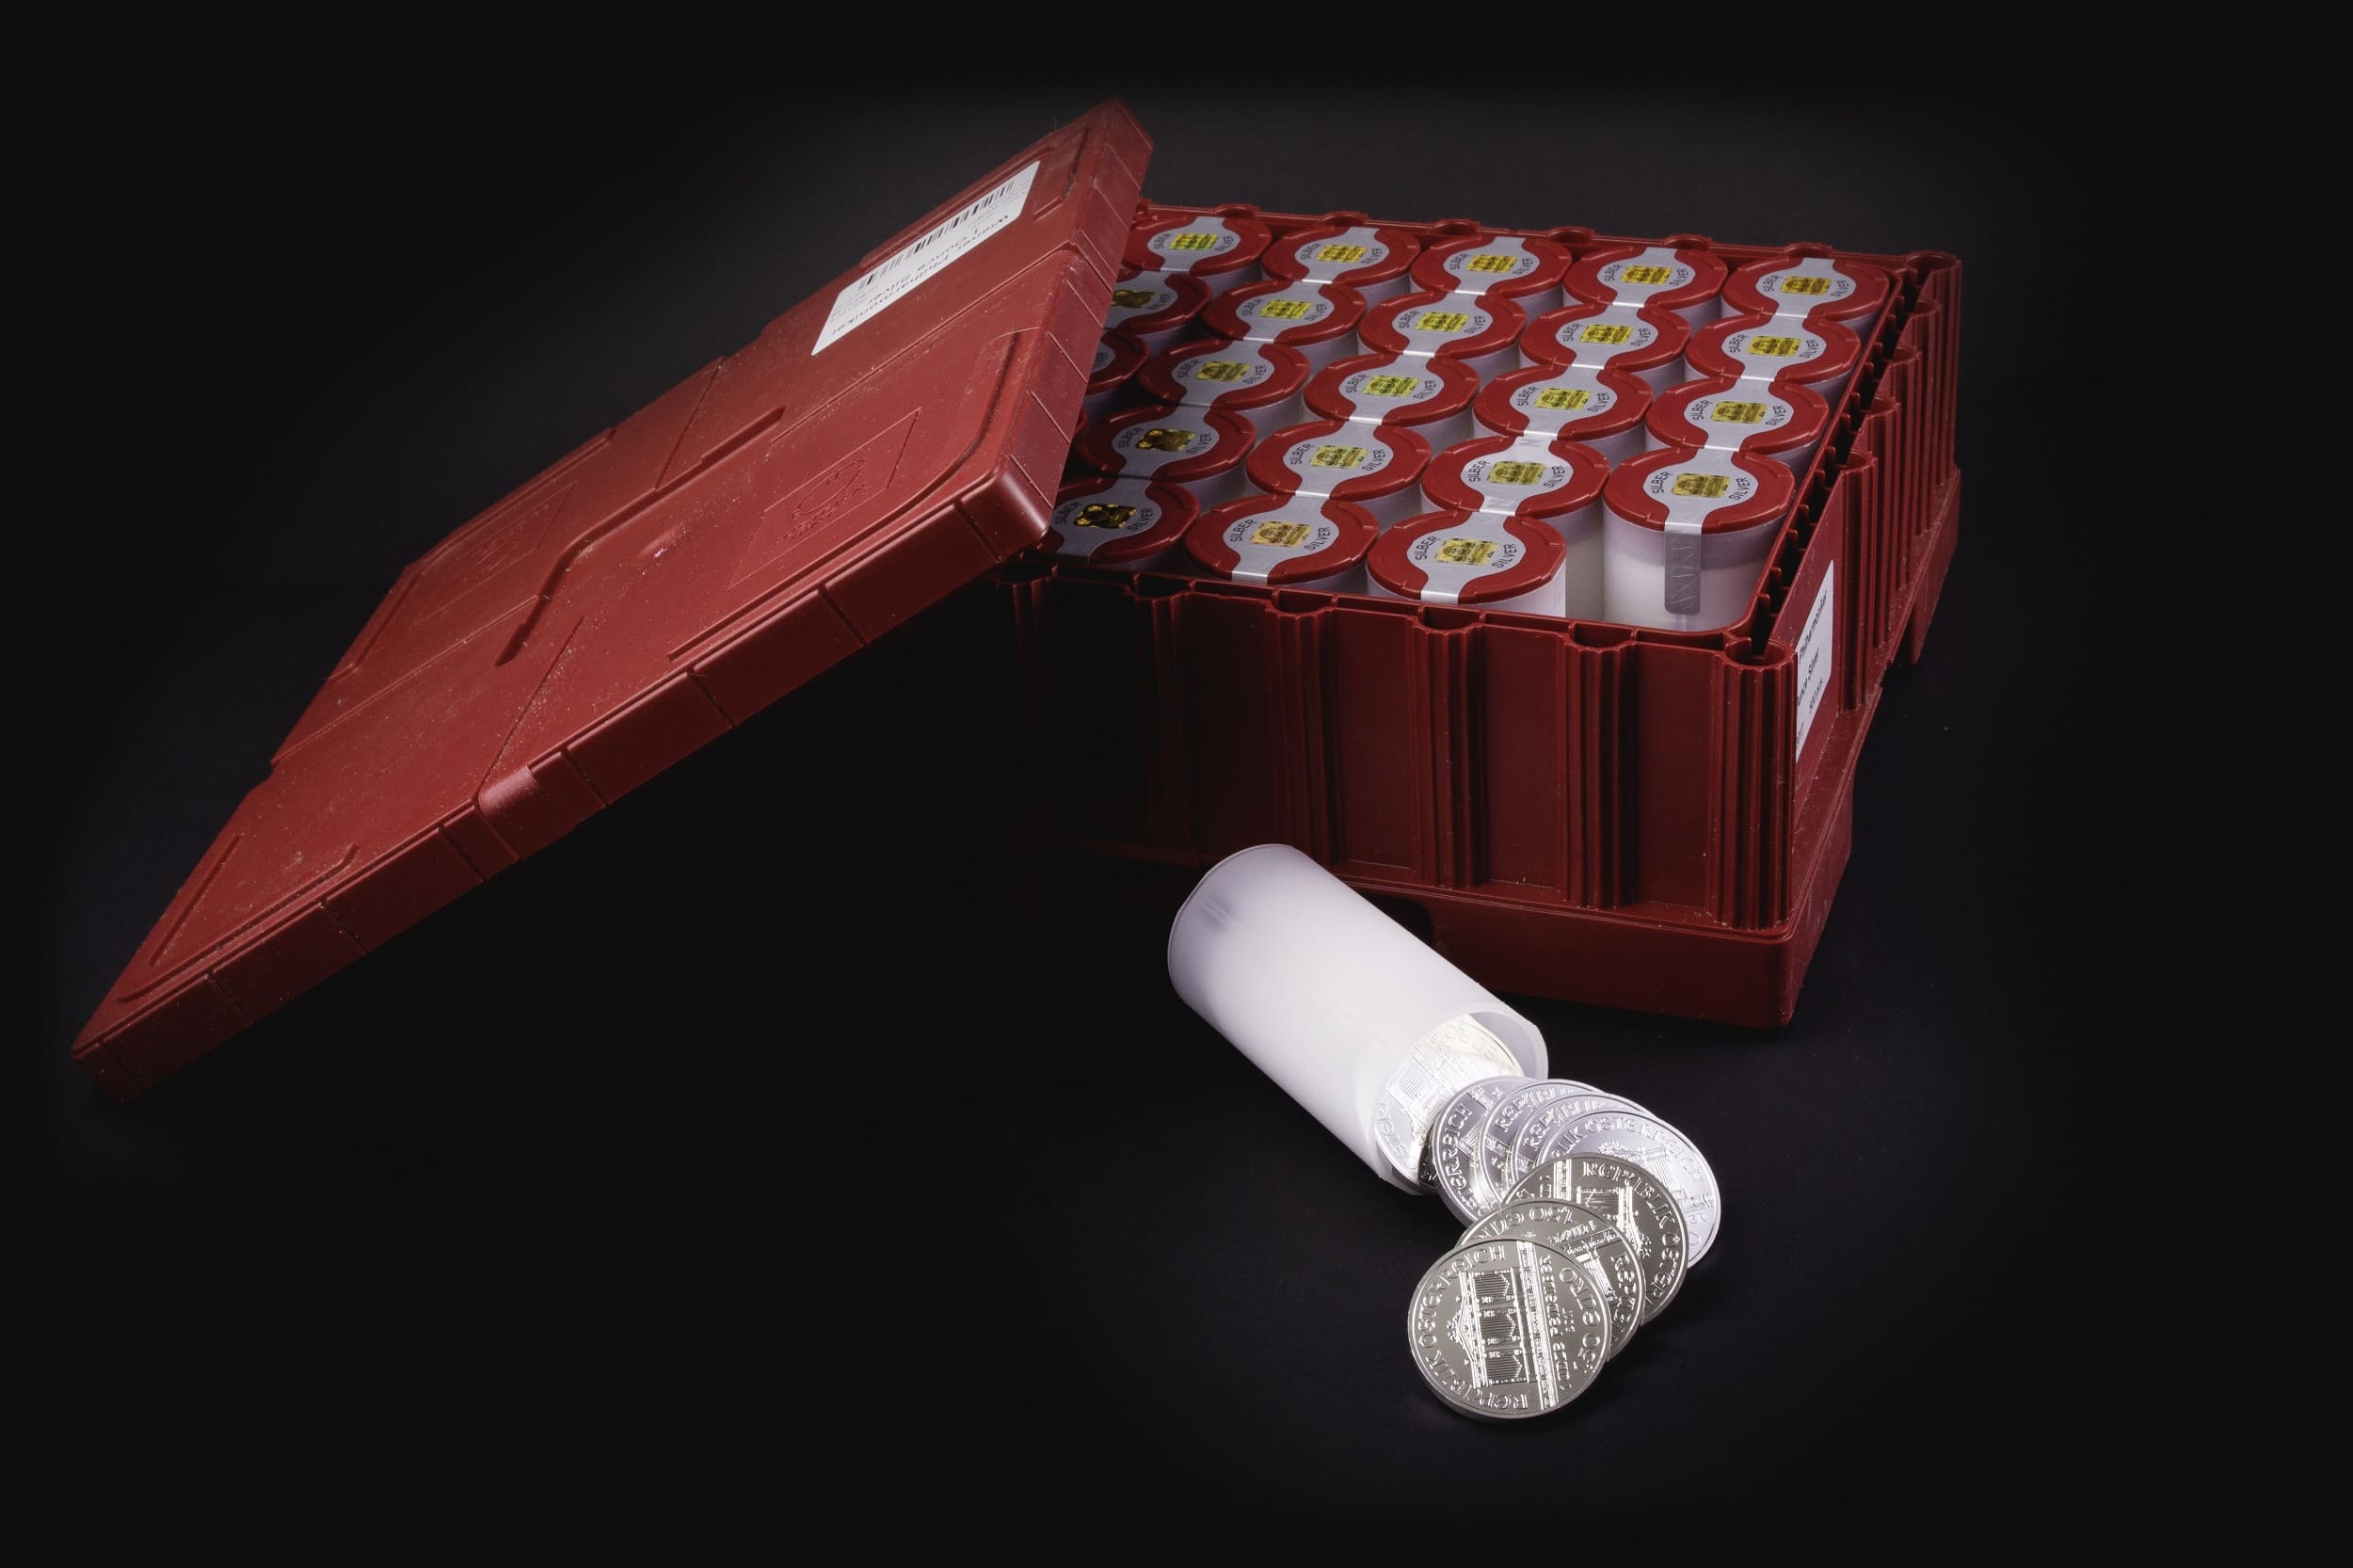 Master box containing Vienna Philharmonic tubes against a black background